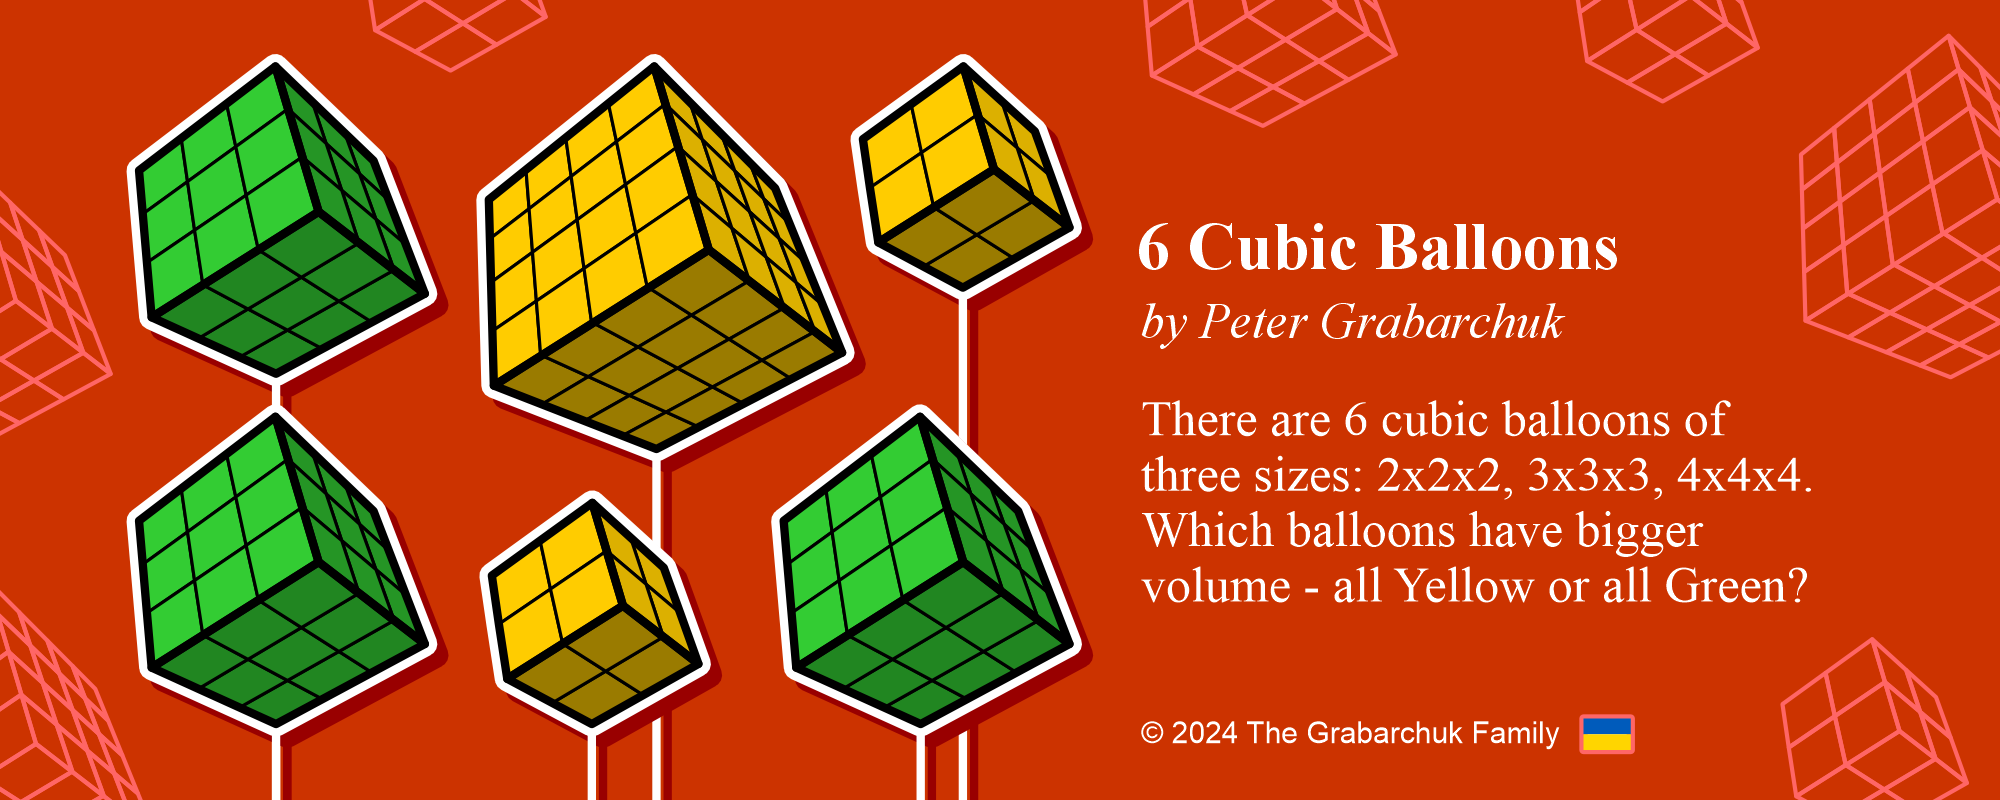 6 Cubic Balloons by Peter Grabarchuk